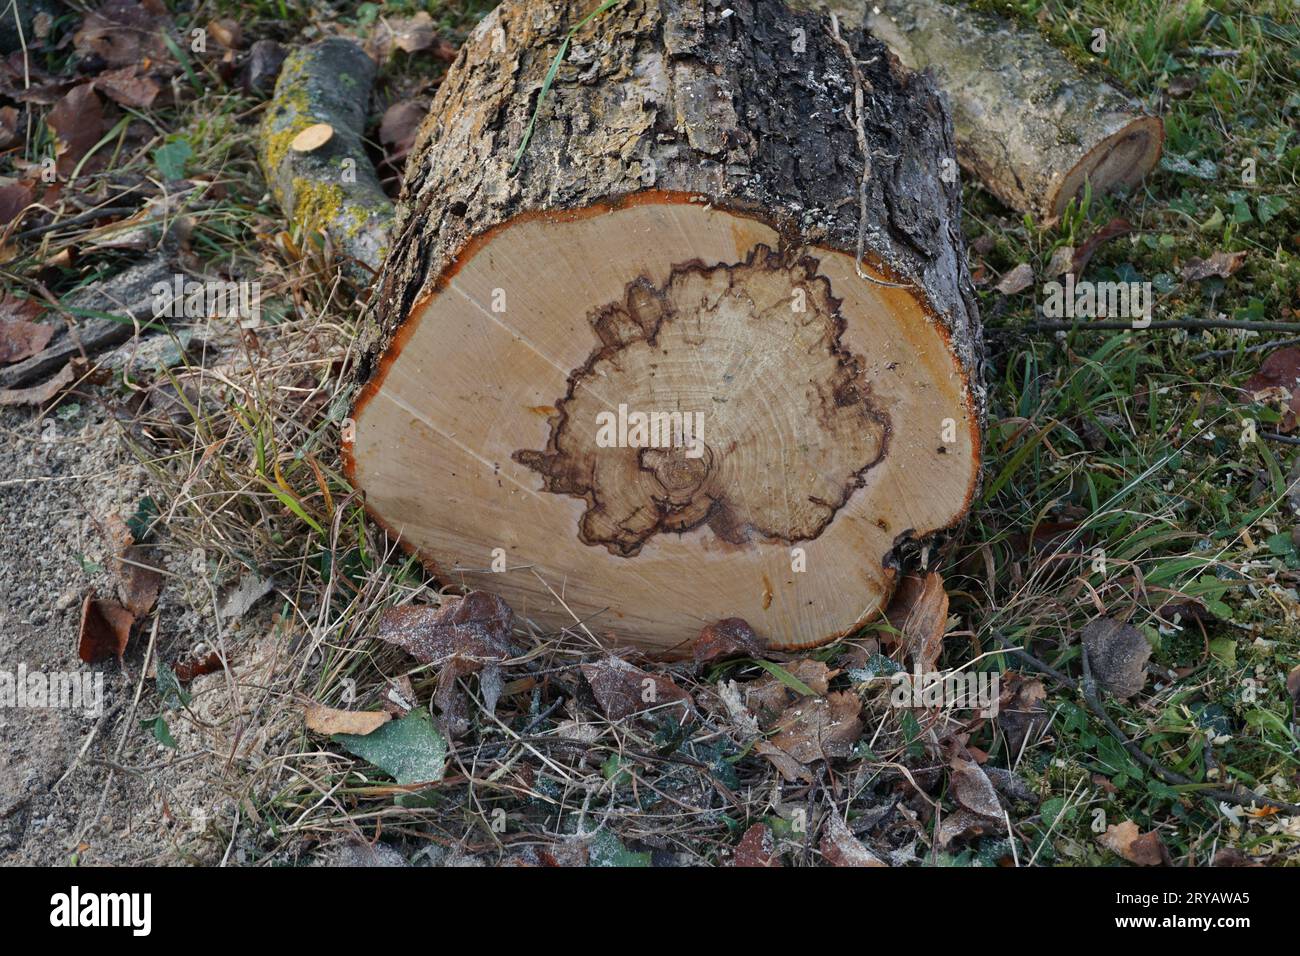 Truncated tree trunk with fungus infestation in the middle Stock Photo